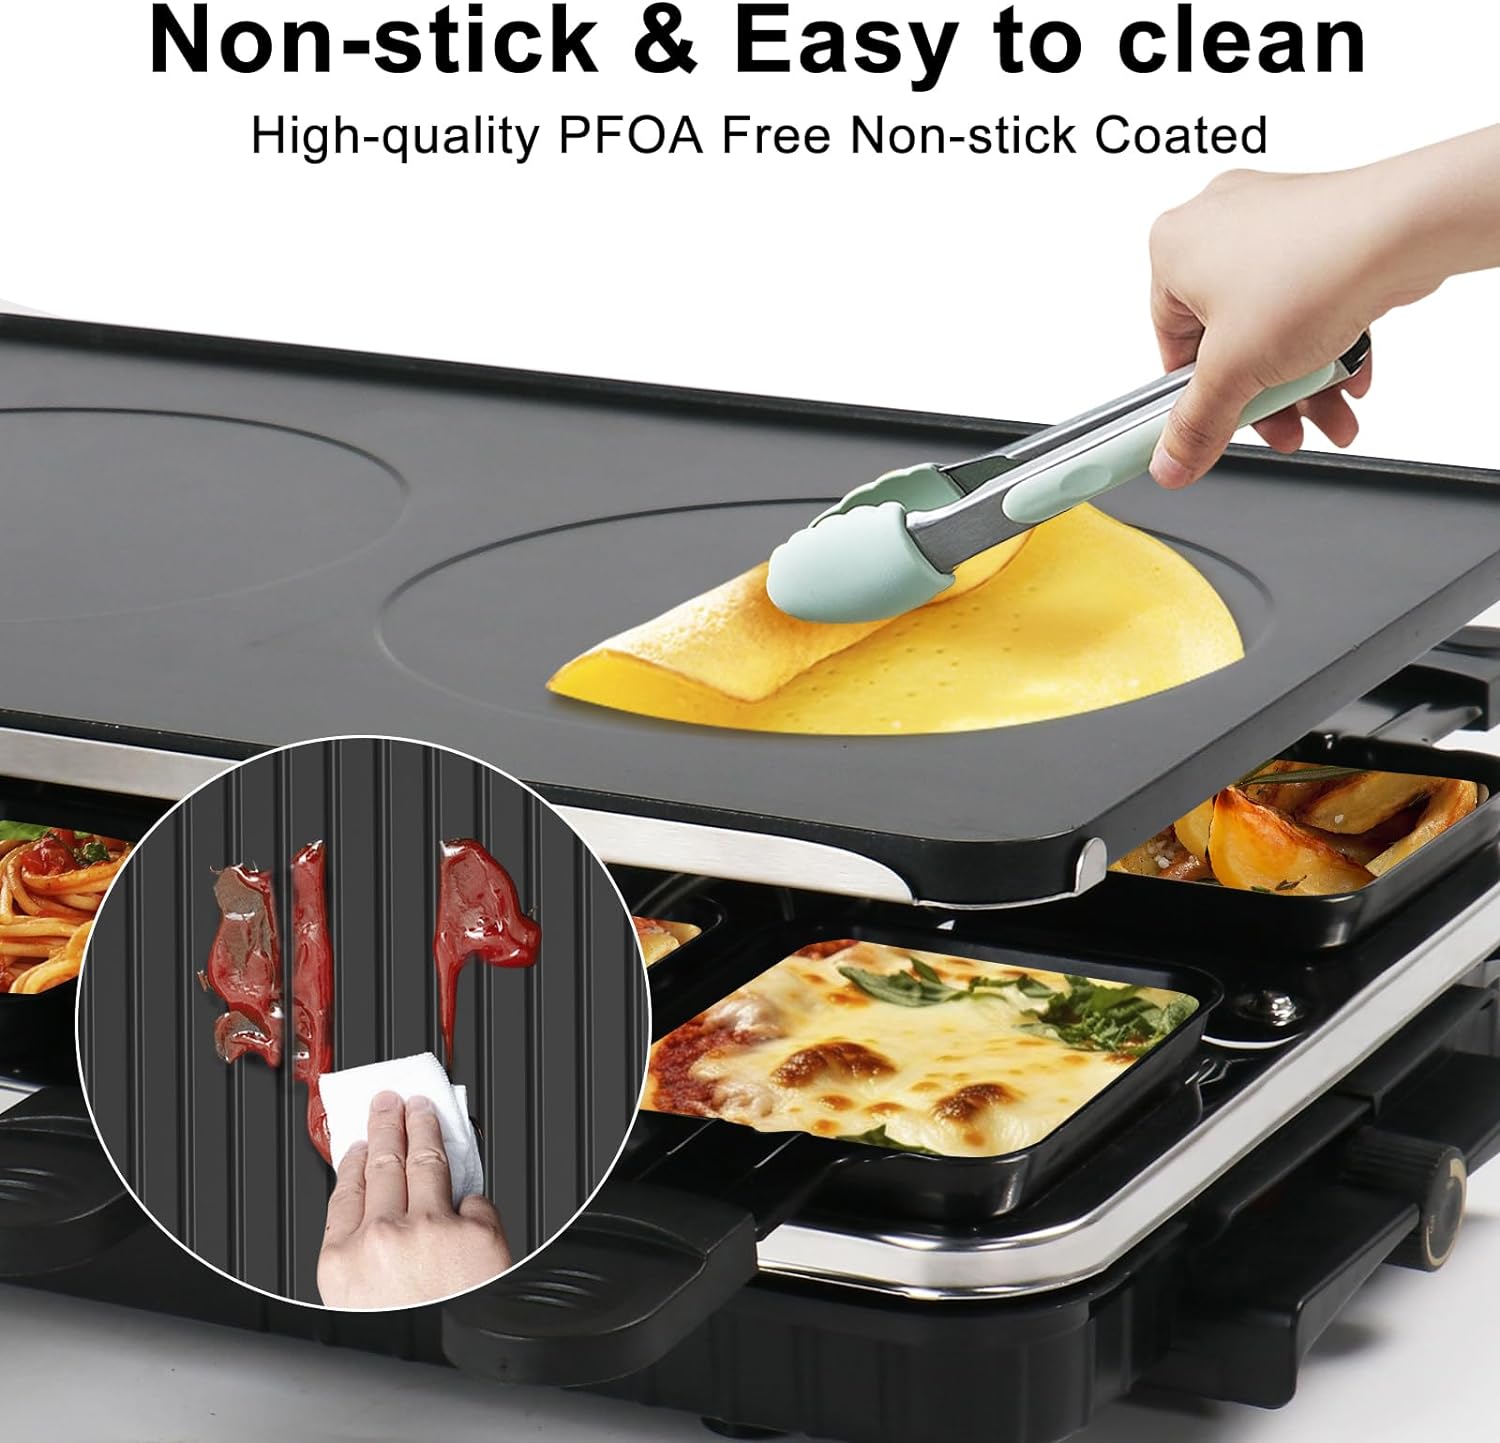 Raclette Table Grill, Electric Grill Indoor Korean BBQ Grill 2 in 1 Electric Griddle Nonstick with 8 Raclette Cheese Pans Adjustable Temperature Control 1300W Ideal for Family and Party Fun(Black)